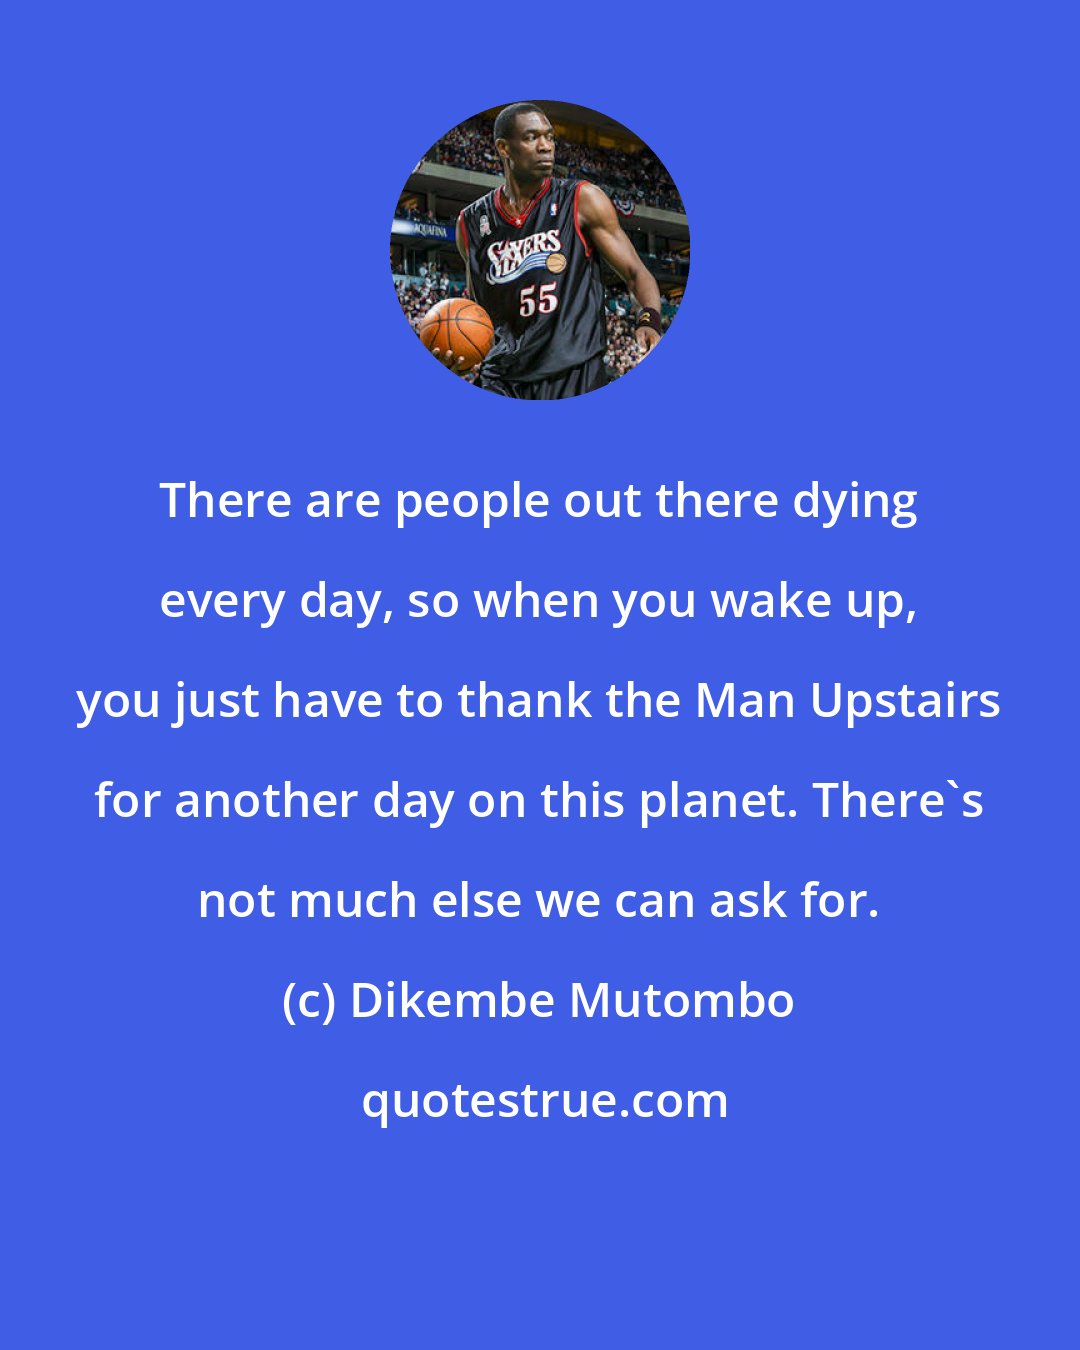 Dikembe Mutombo: There are people out there dying every day, so when you wake up, you just have to thank the Man Upstairs for another day on this planet. There's not much else we can ask for.